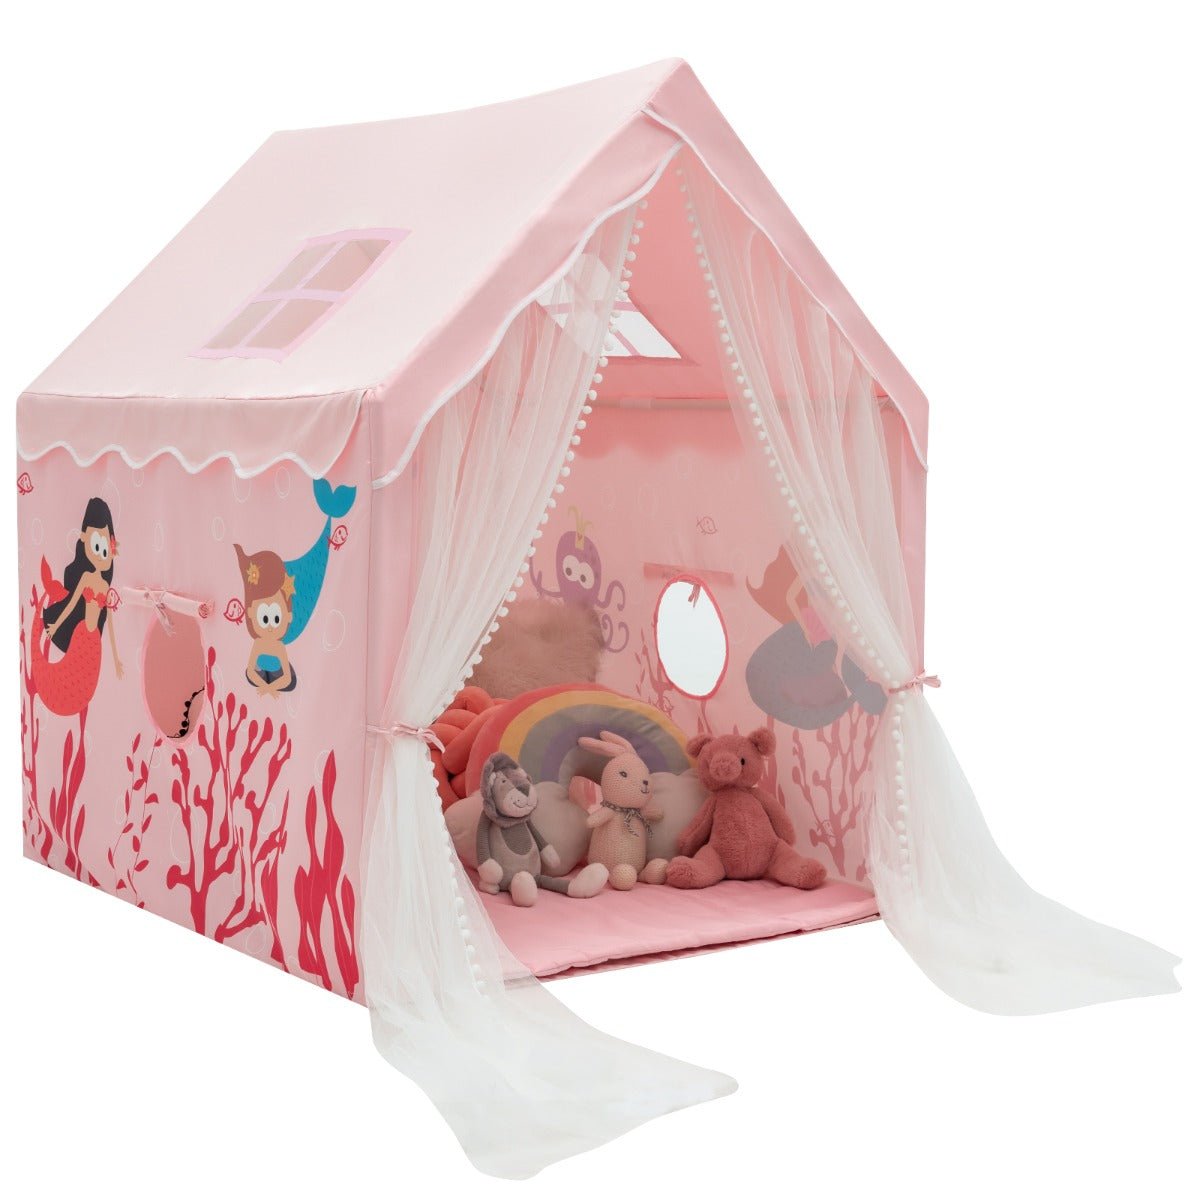 Large Pink Play Tent for Kids with Gauze Door Curtain: Inspiring Playtime